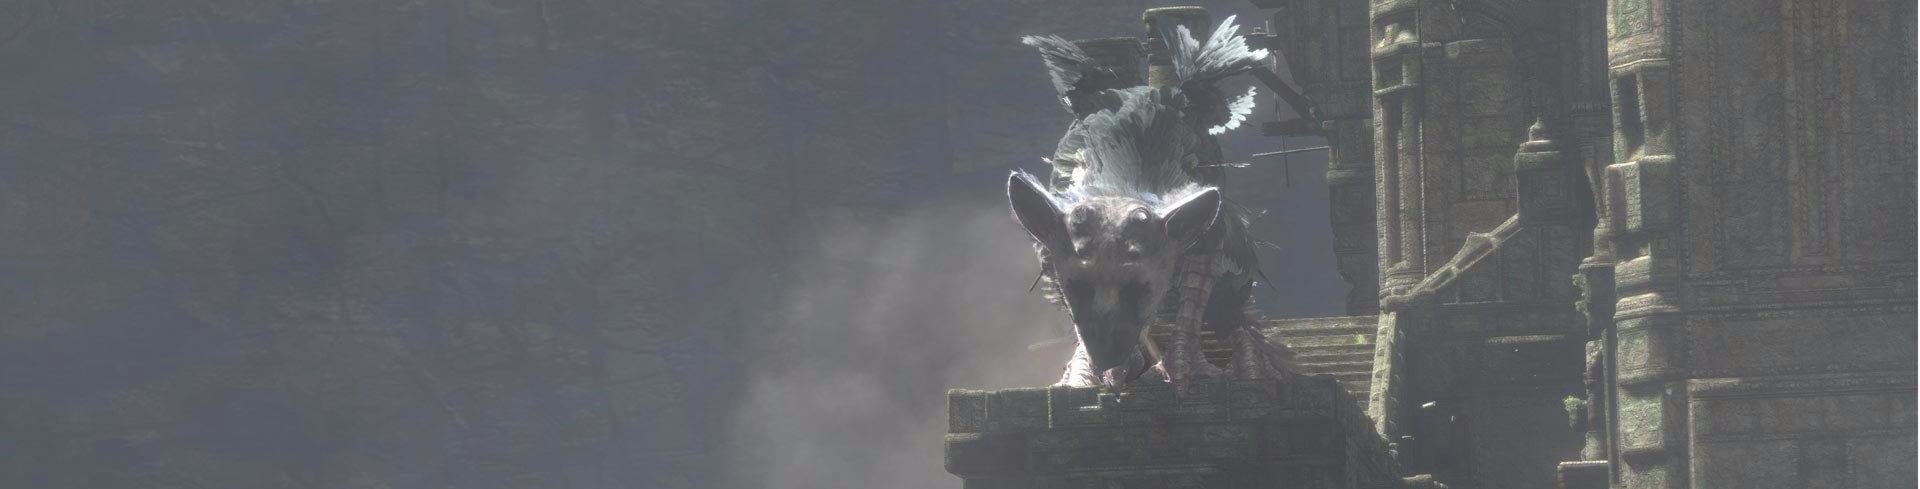 Image for “Never in my wildest imagination did I think The Last Guardian would take this long”